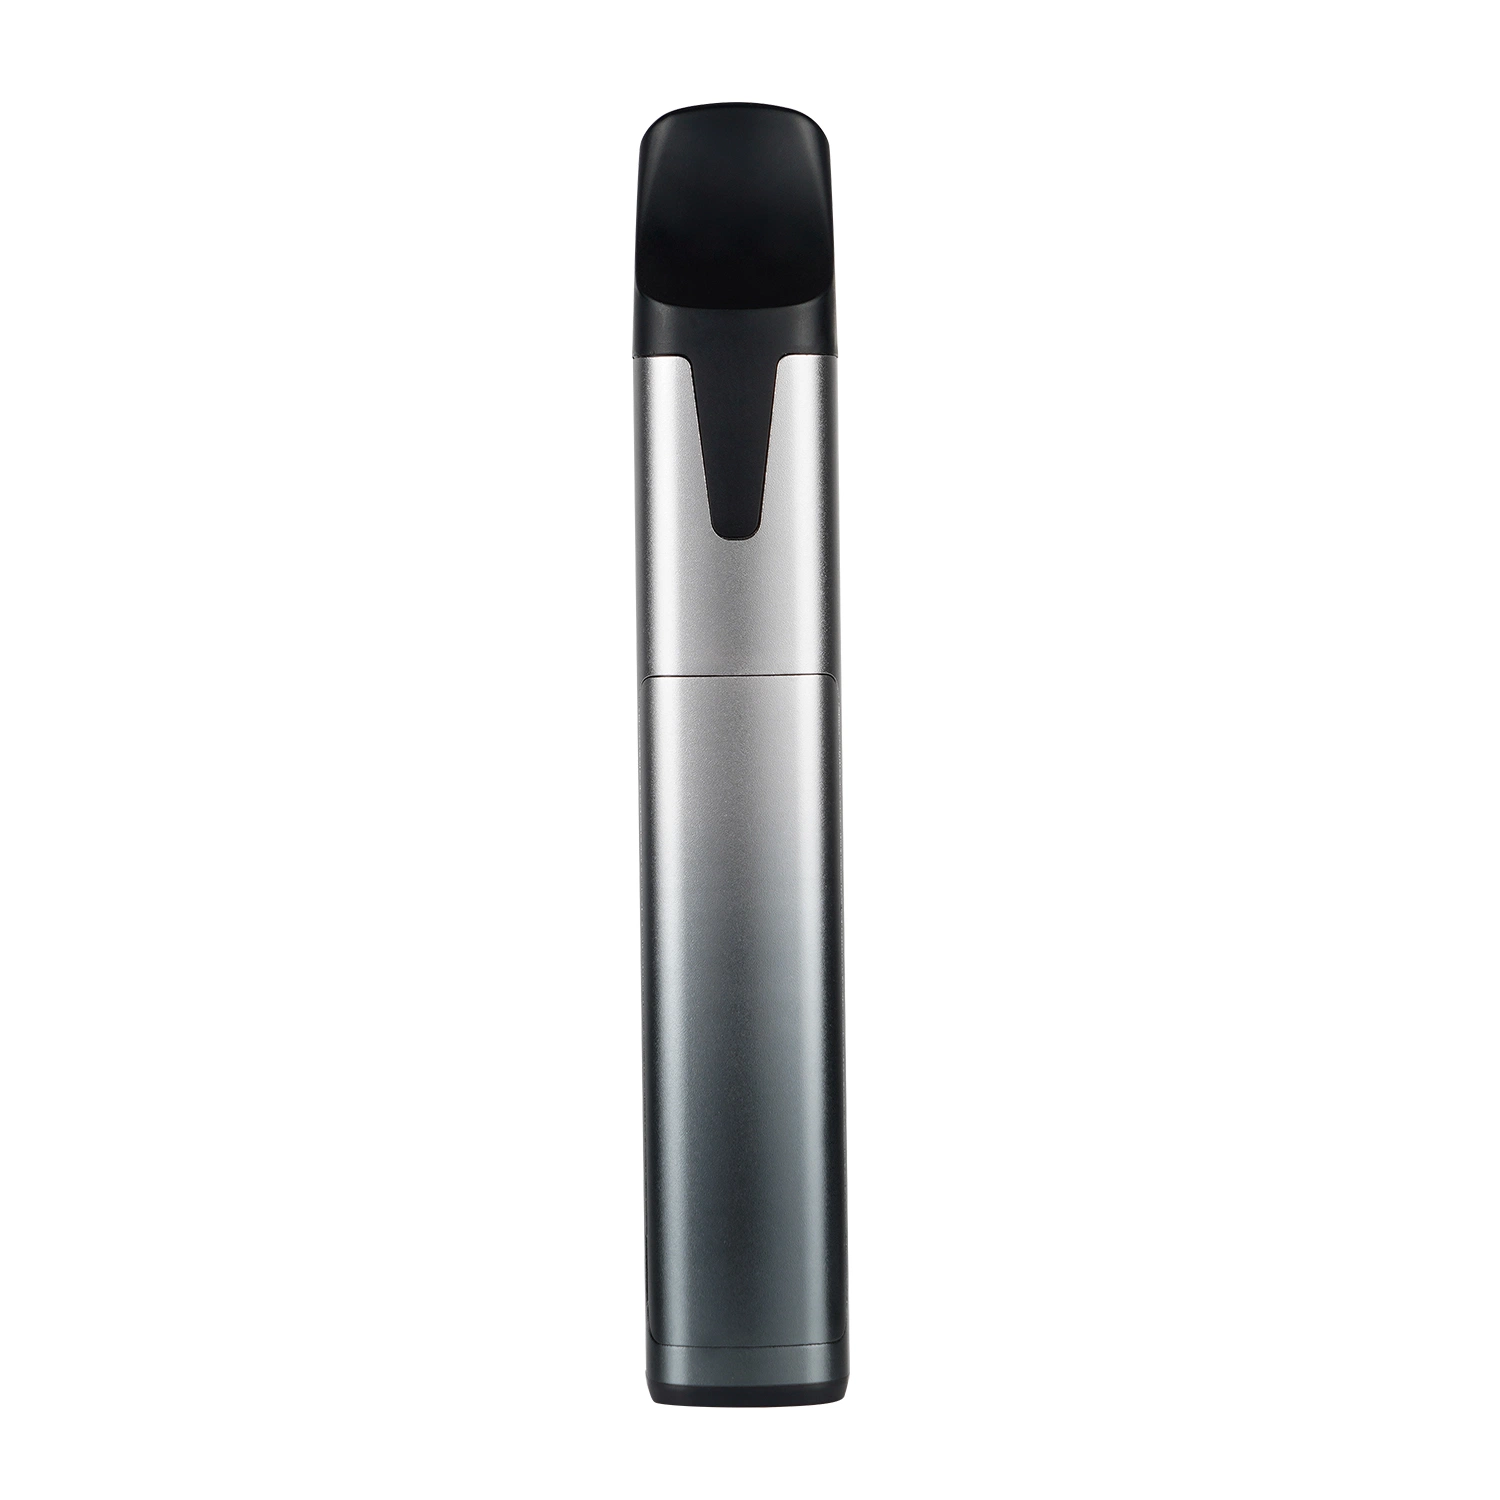 China Wholesale/Supplier 2 in 1 Dry Herb Vaporizer for Herb and Wax Vape Pen Electric Cigarette